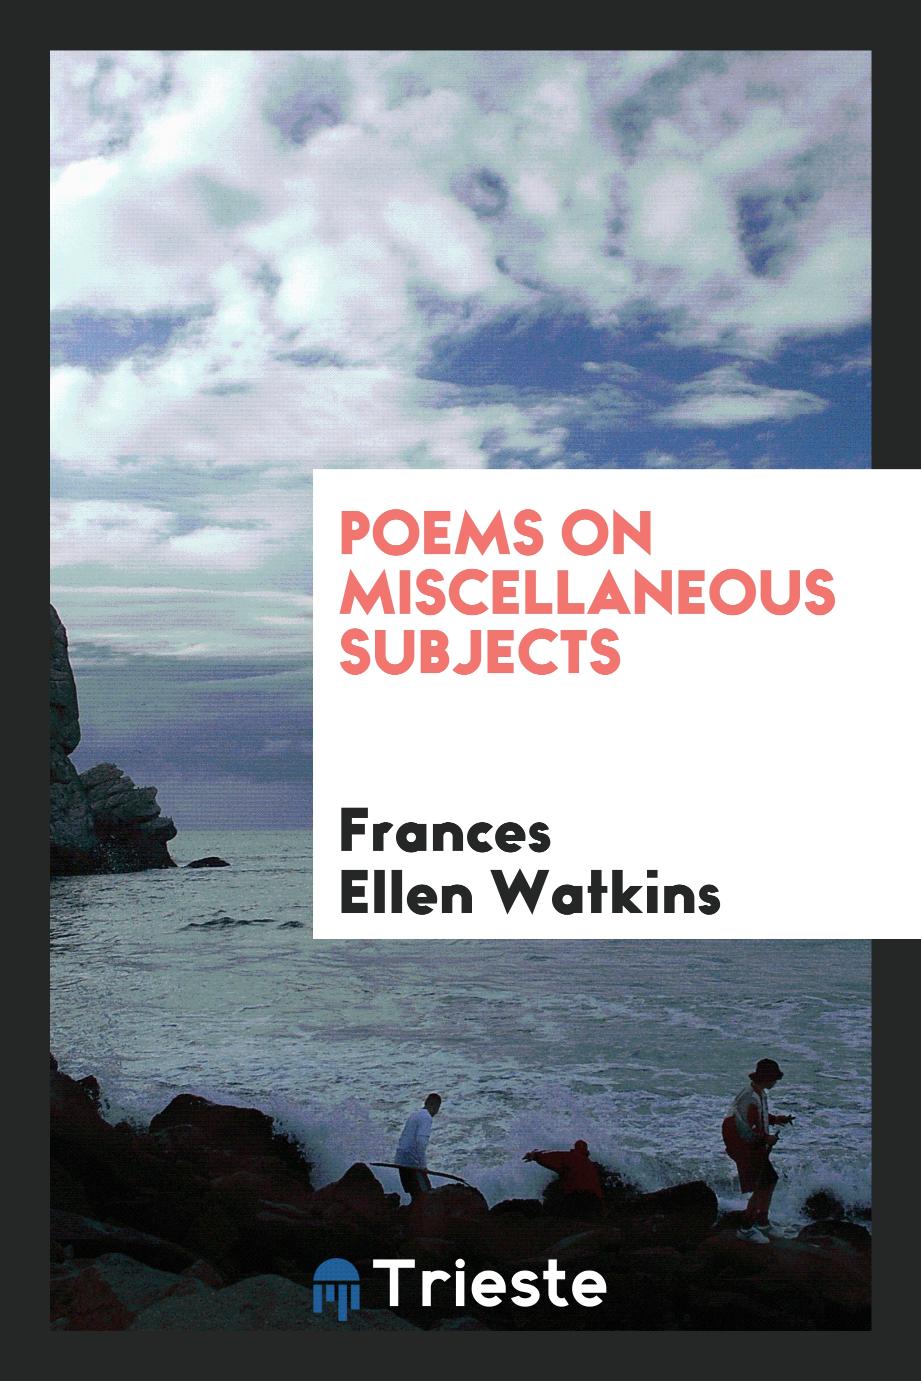 Poems on miscellaneous subjects